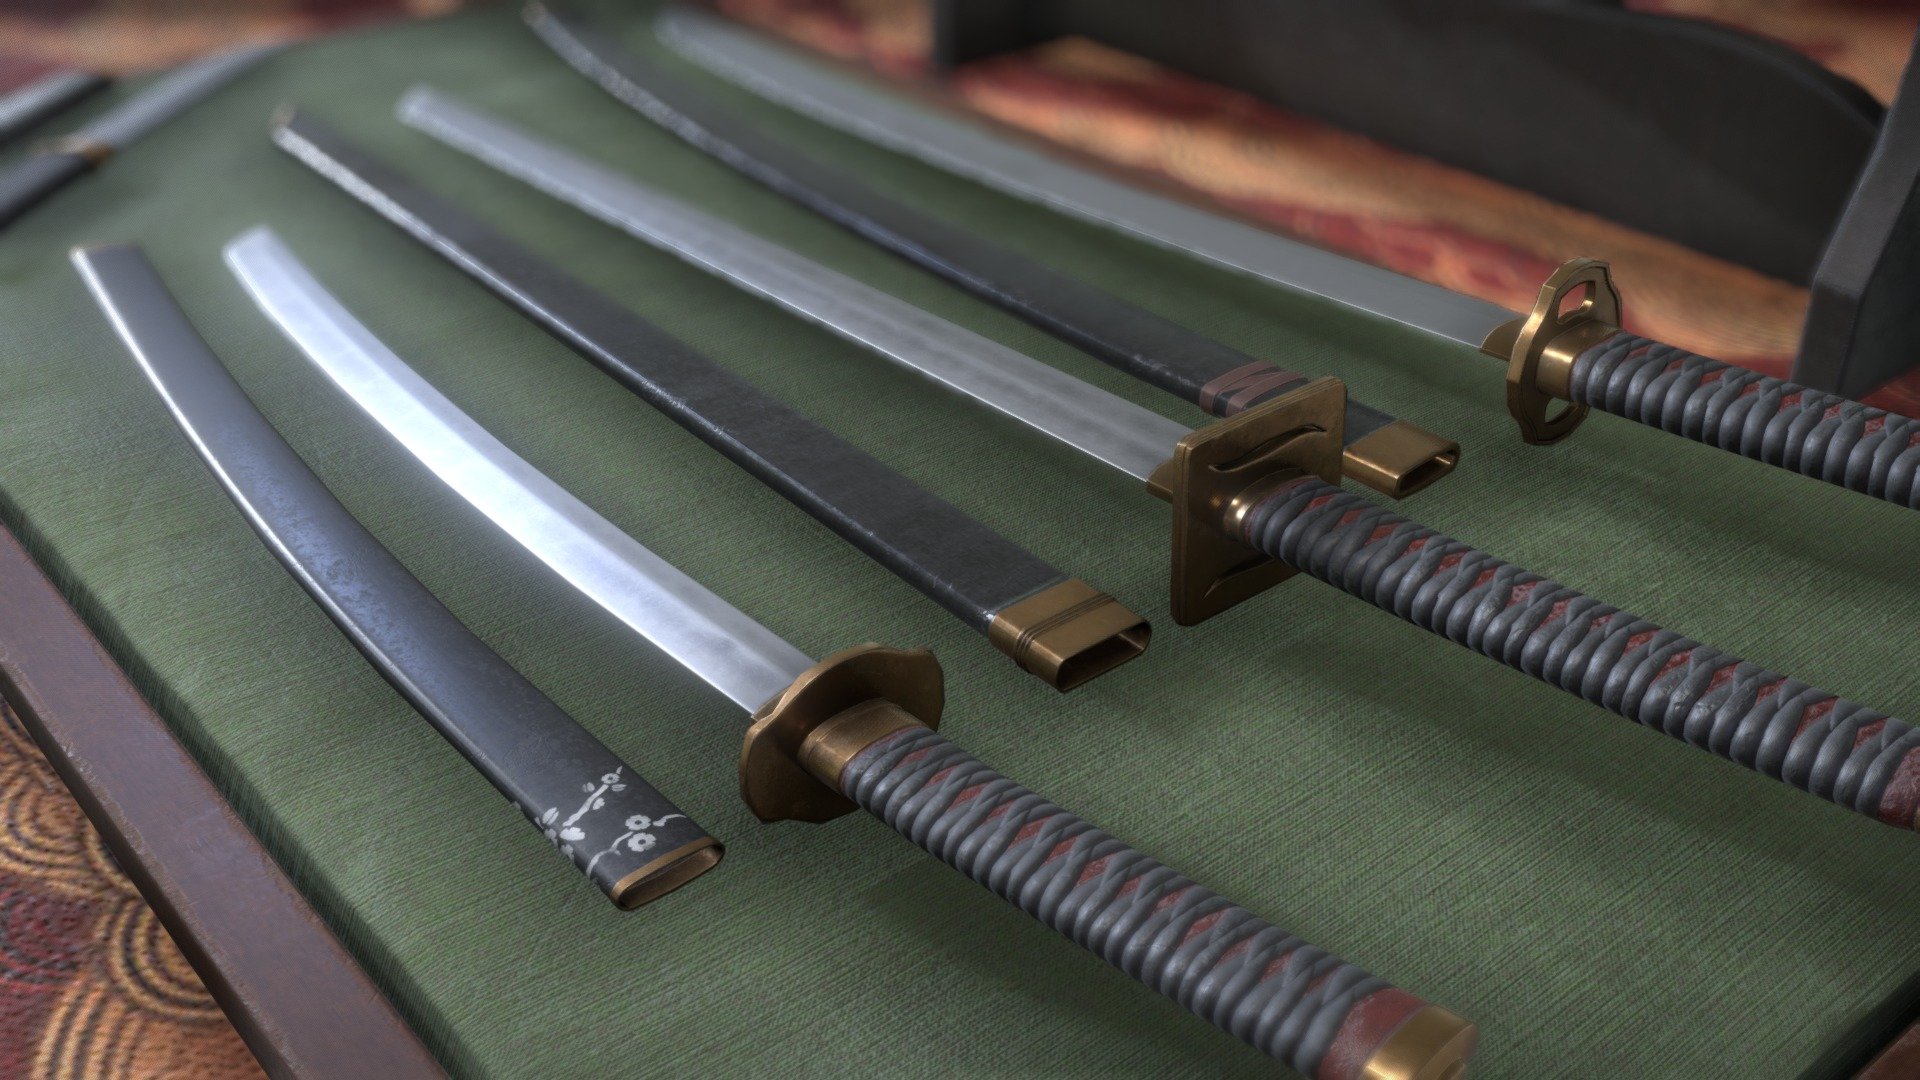 You can use this model for any purpose, even in a commercial project.
There are LODs in the archives




Card resolution: 4096 to 4096

License: CC Attribution.

Artstation - Сlick

Boosty - Сlick

Models: Katana, Naginata, Nodachi, Shinobigatana, Tanto, Wakizashi, Yari and decorations

(I post paid and free content on Boosty. Any packs, models, textures, etc. that I was going to sell can be downloaded by subscribers of the &ldquo;Adept